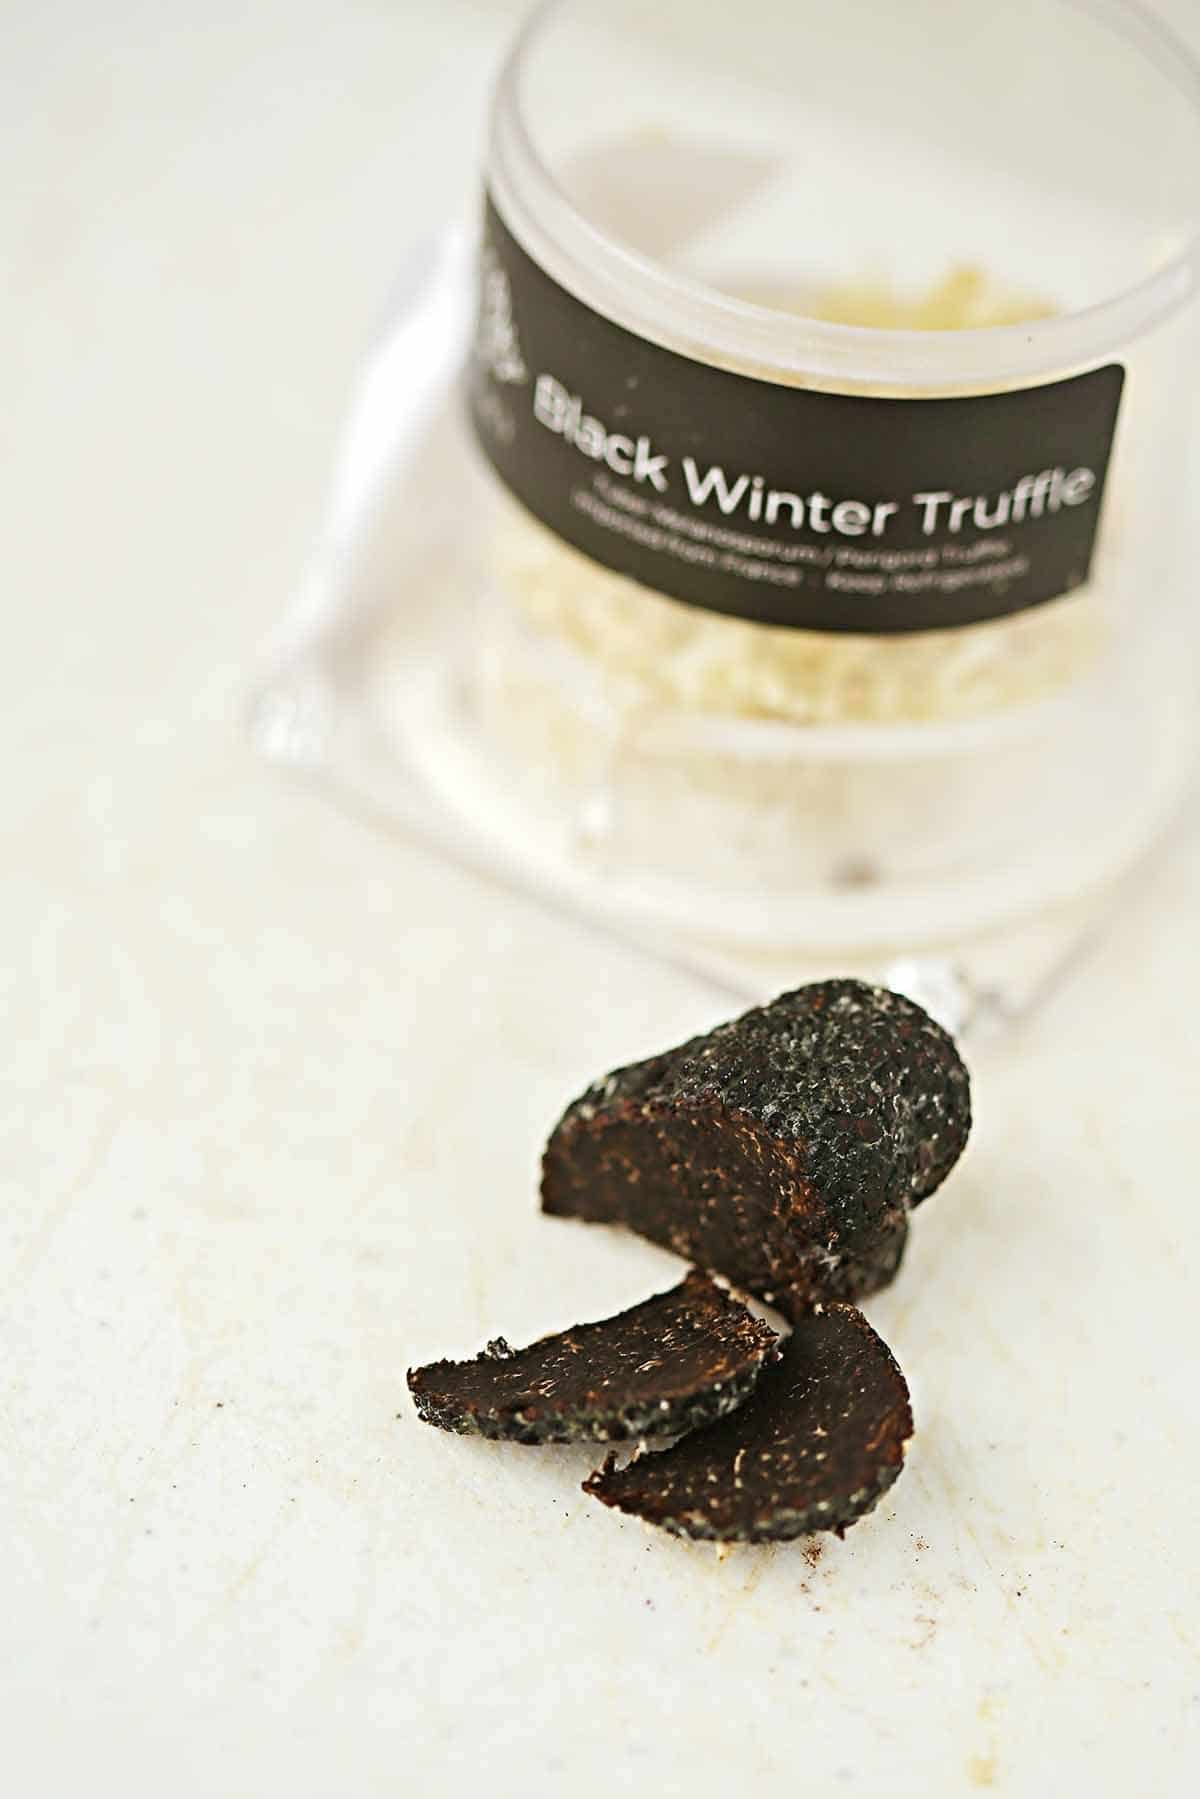 white table top with sliced black truffle and jar labelled black winter truffle